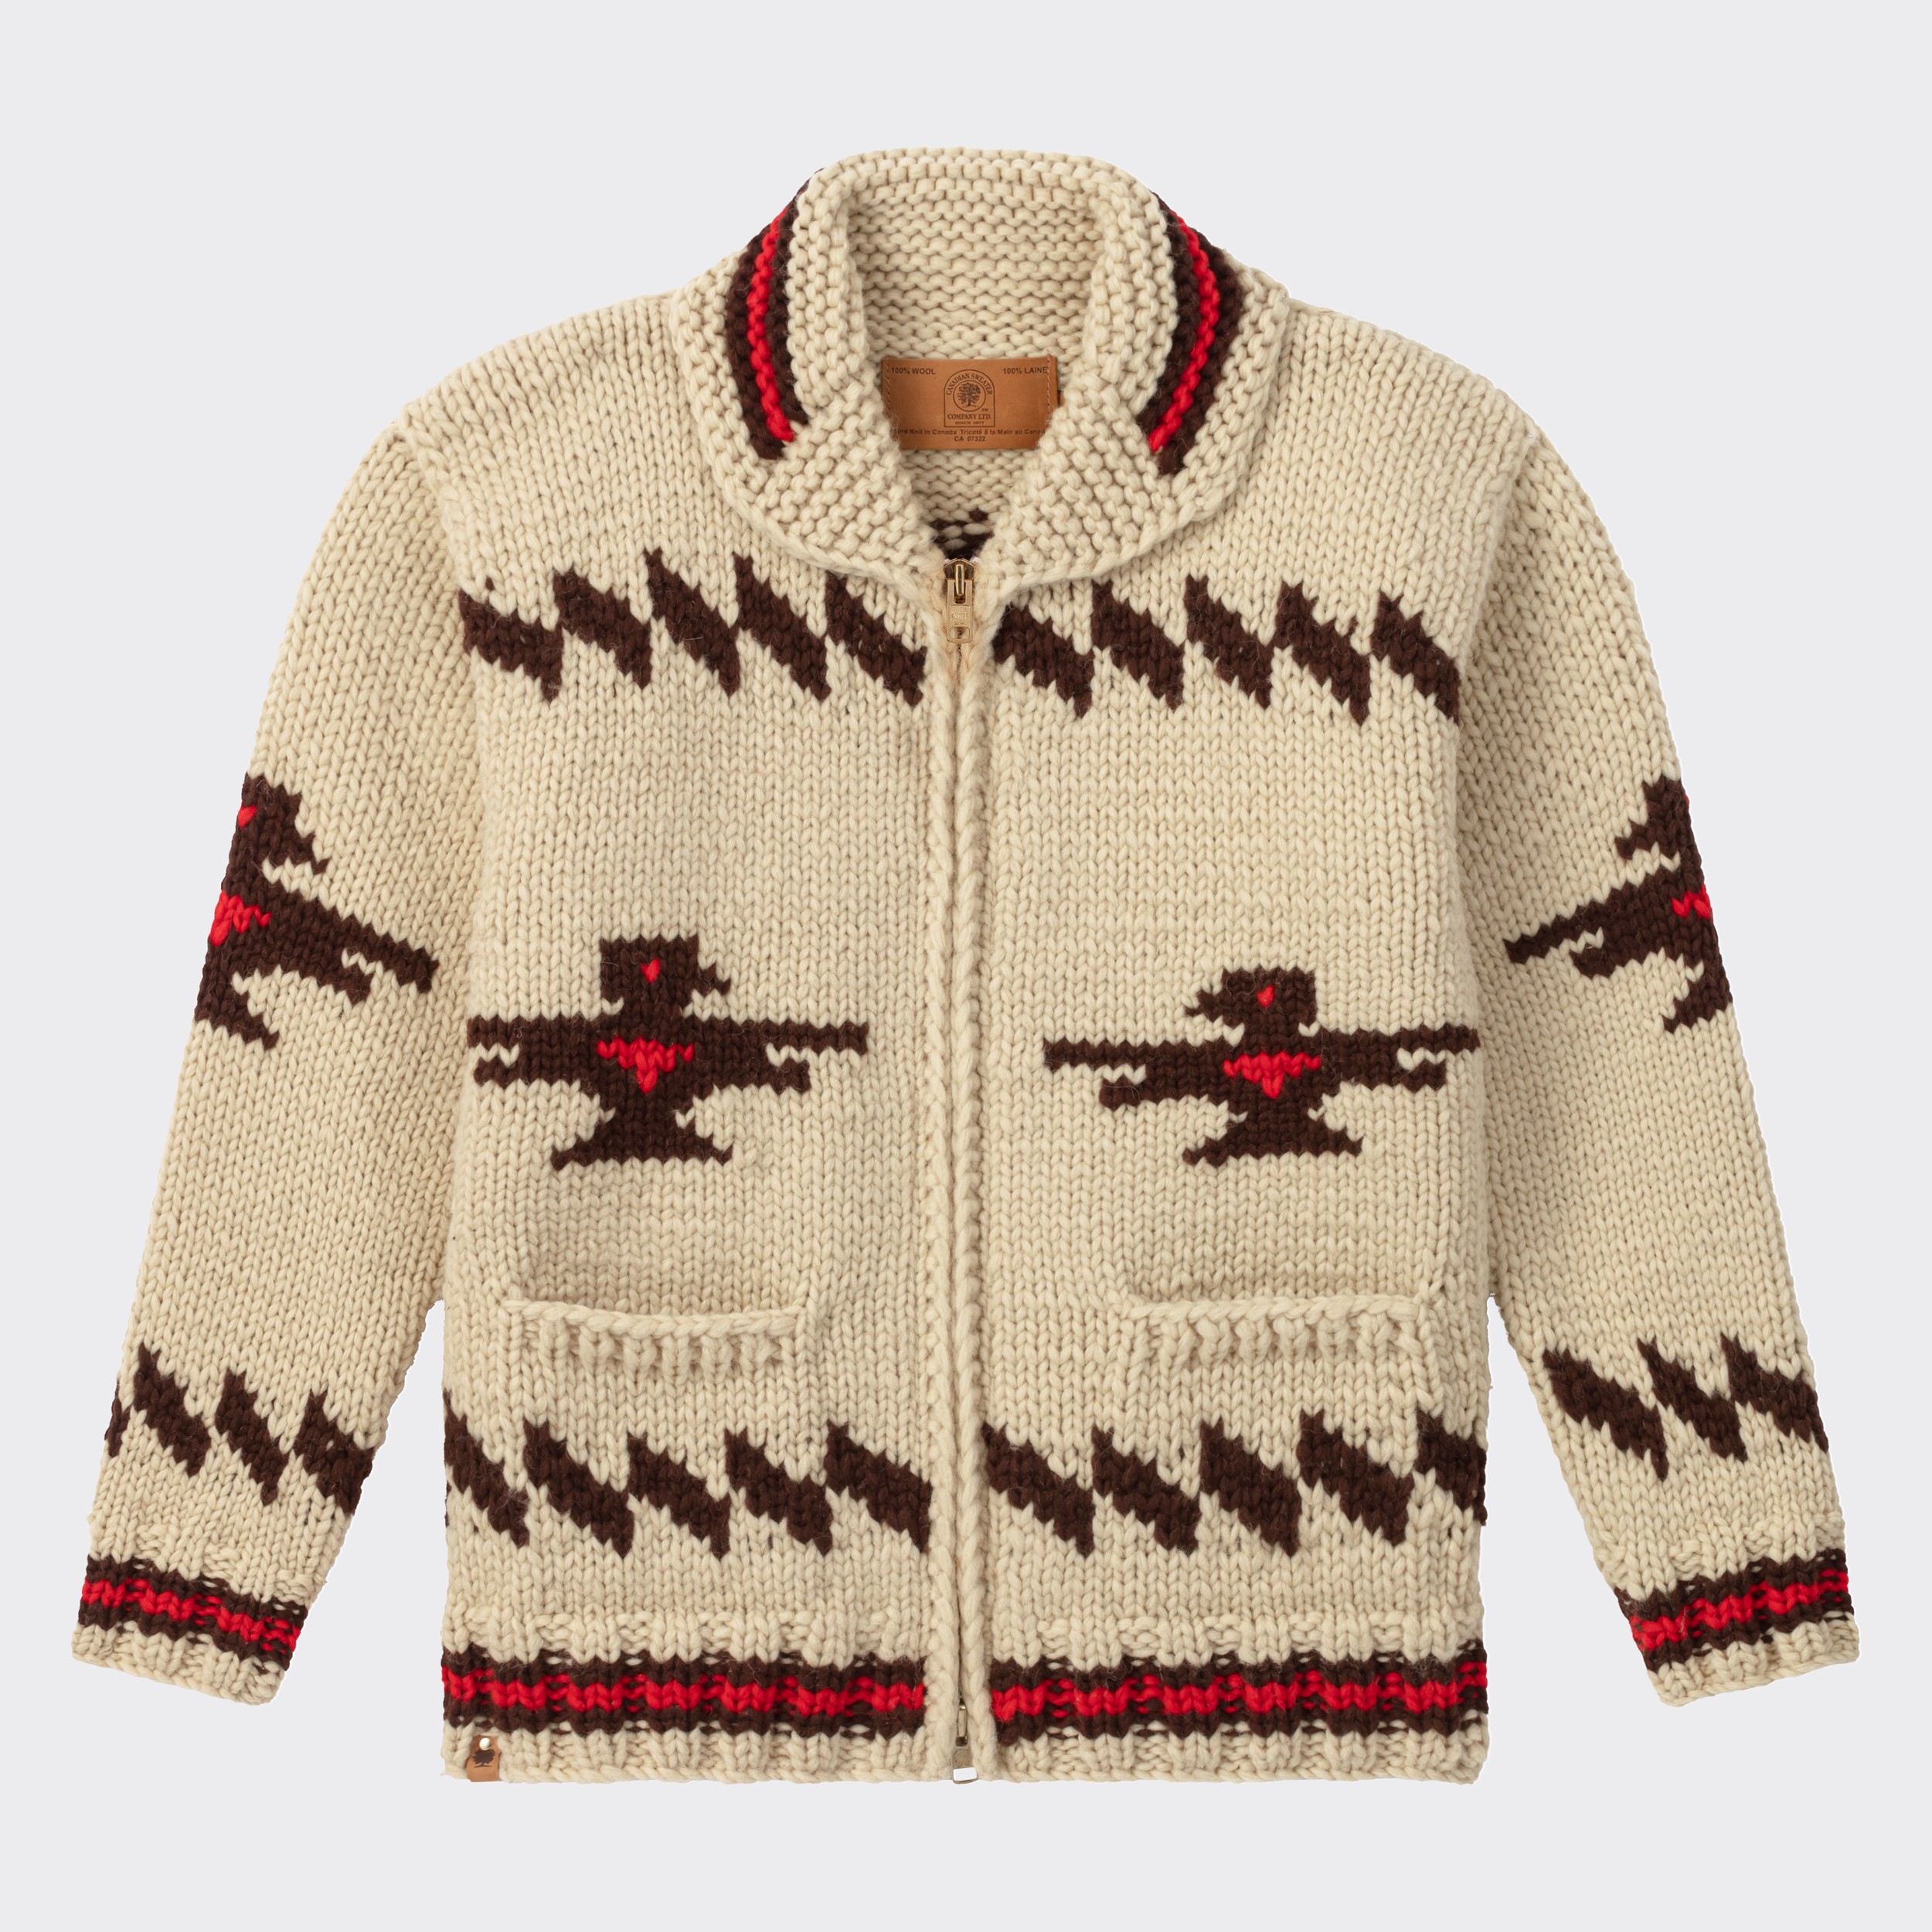 Canadian Sweater : Cowichan Sweater : Beige/Brown/Red